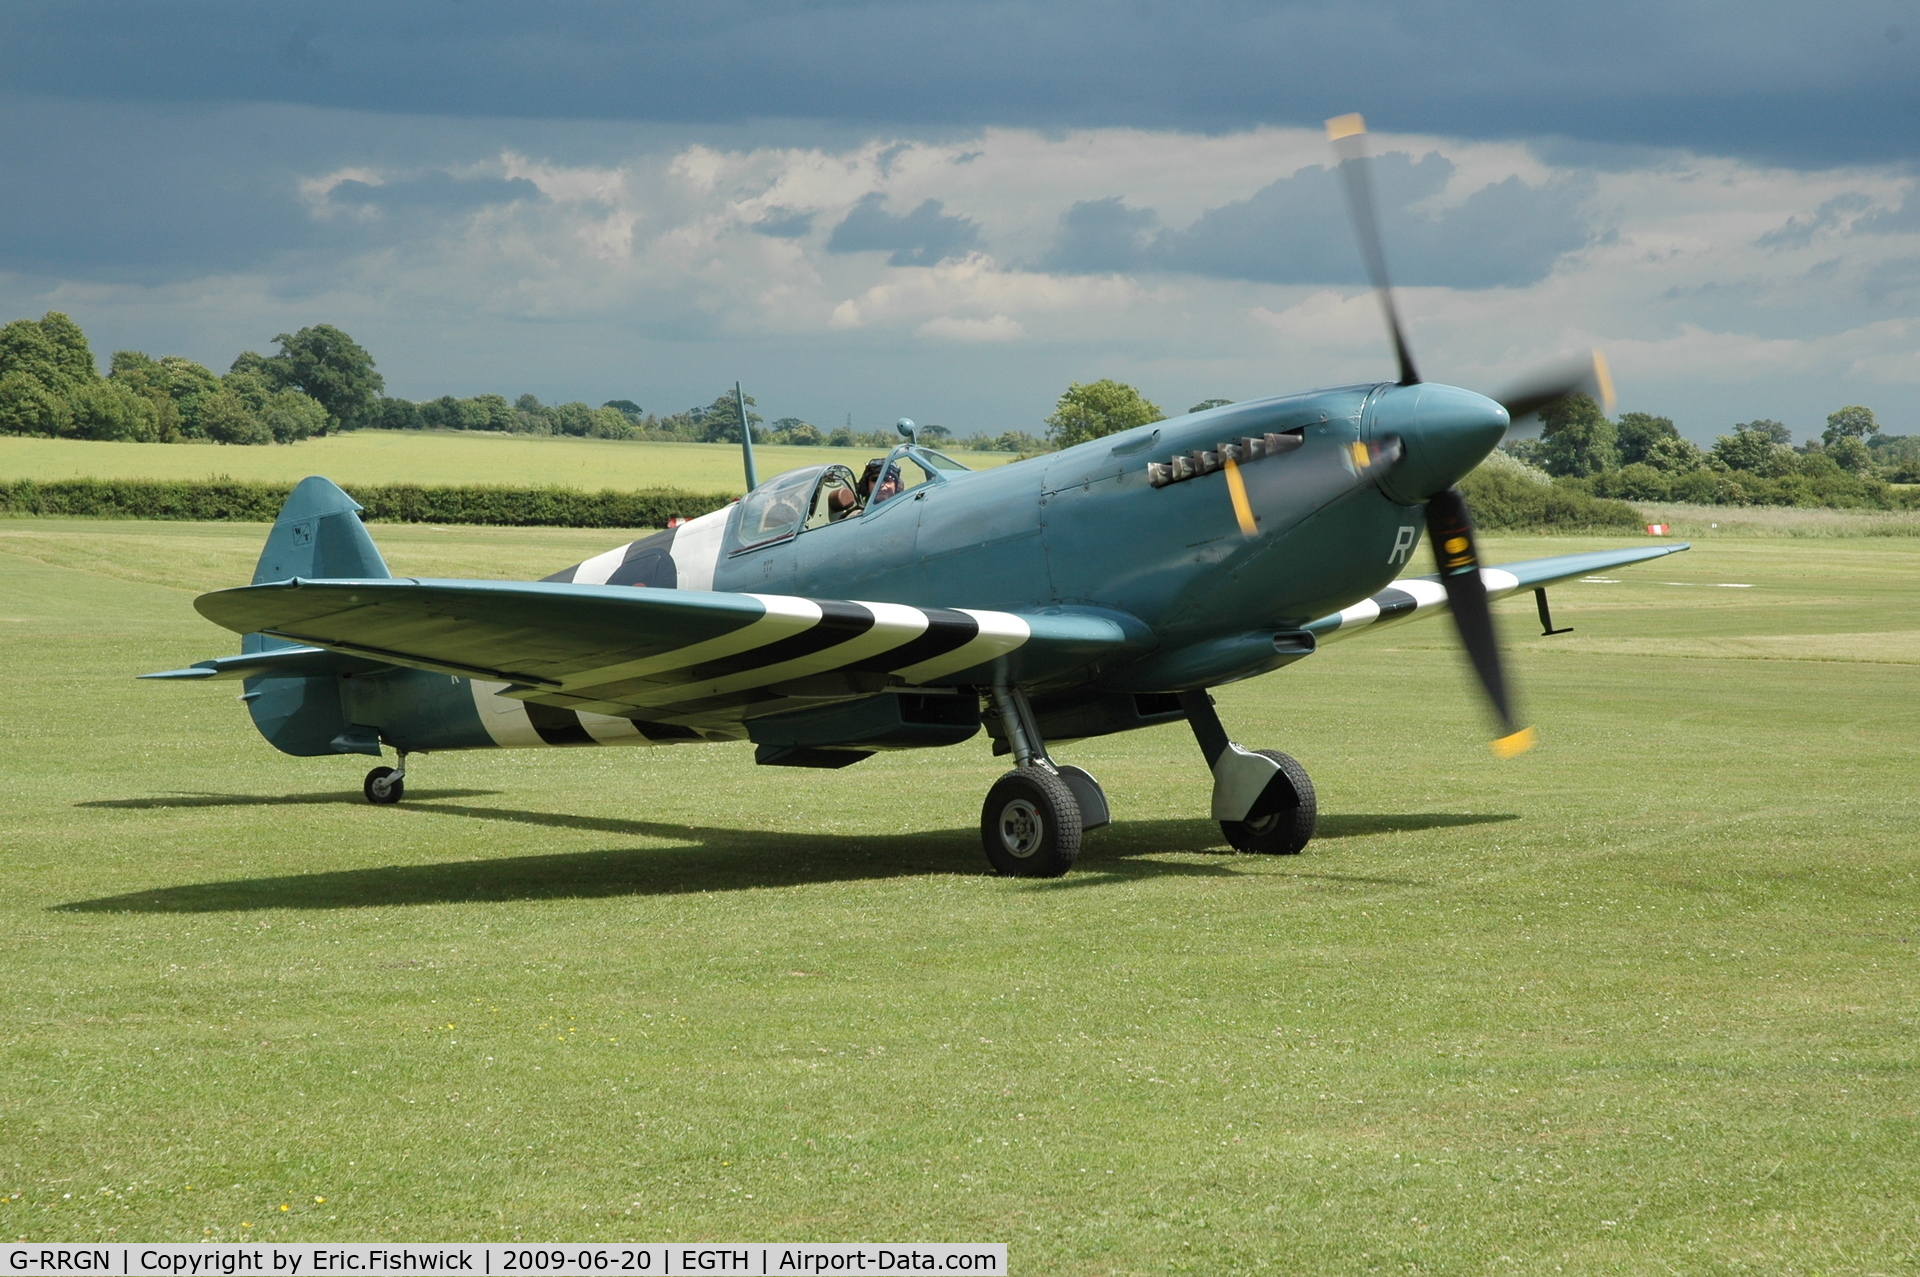 G-RRGN, 1945 Supermarine 389 Spitfire PR.XIX C/N 6S/594677, 3. PS853 at Shuttleworth Military Pagent air Display July 09